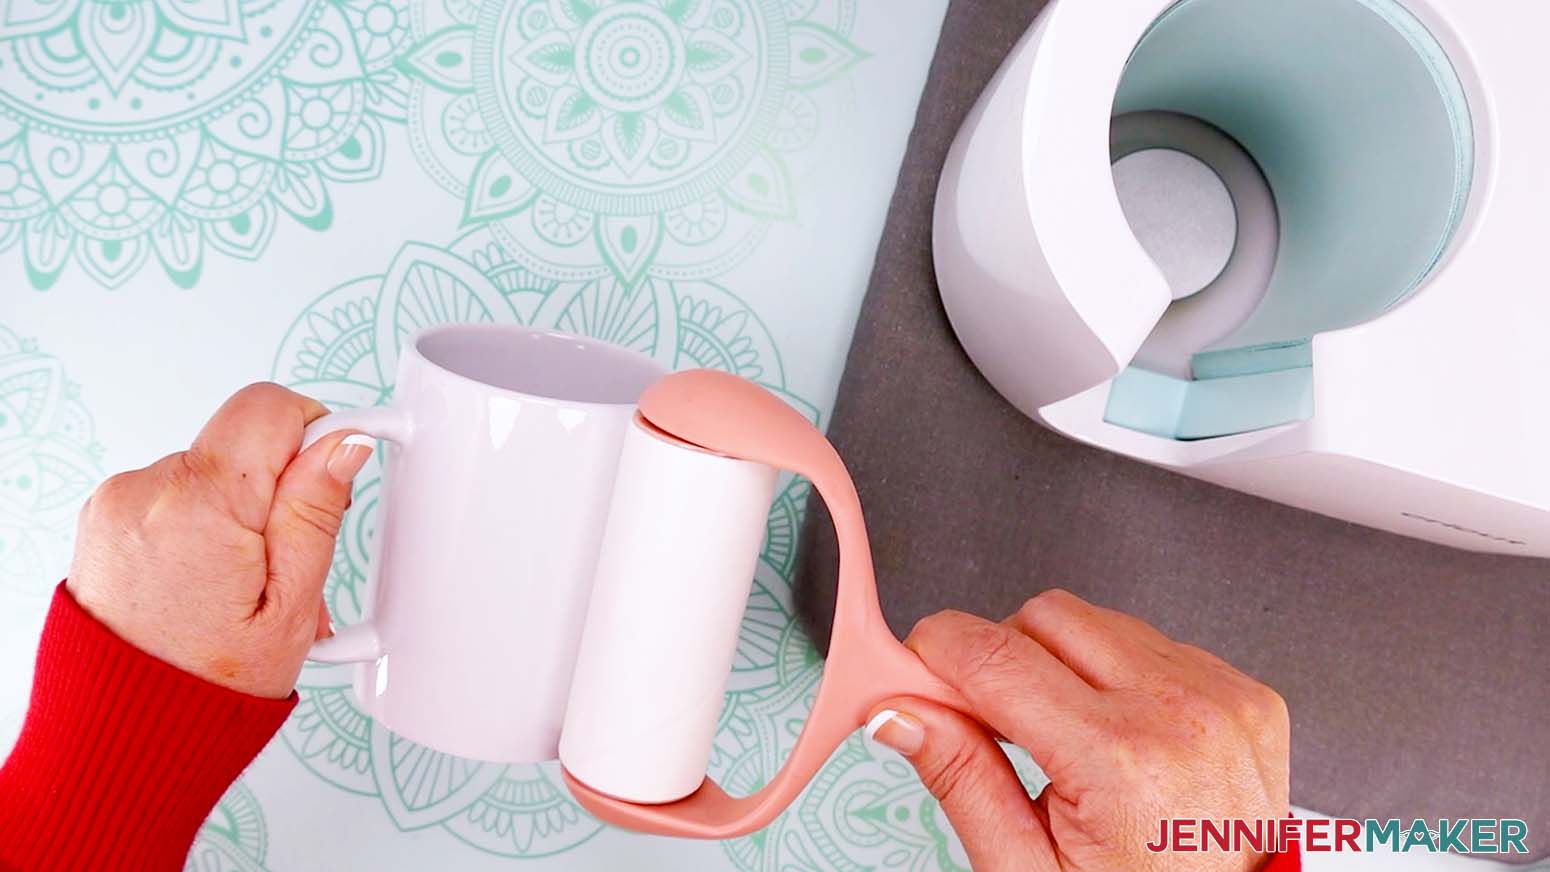 While the press warms up, take a lint roller and roll it around the surface of your mug to clean off any lint that can interfere with the transfer.